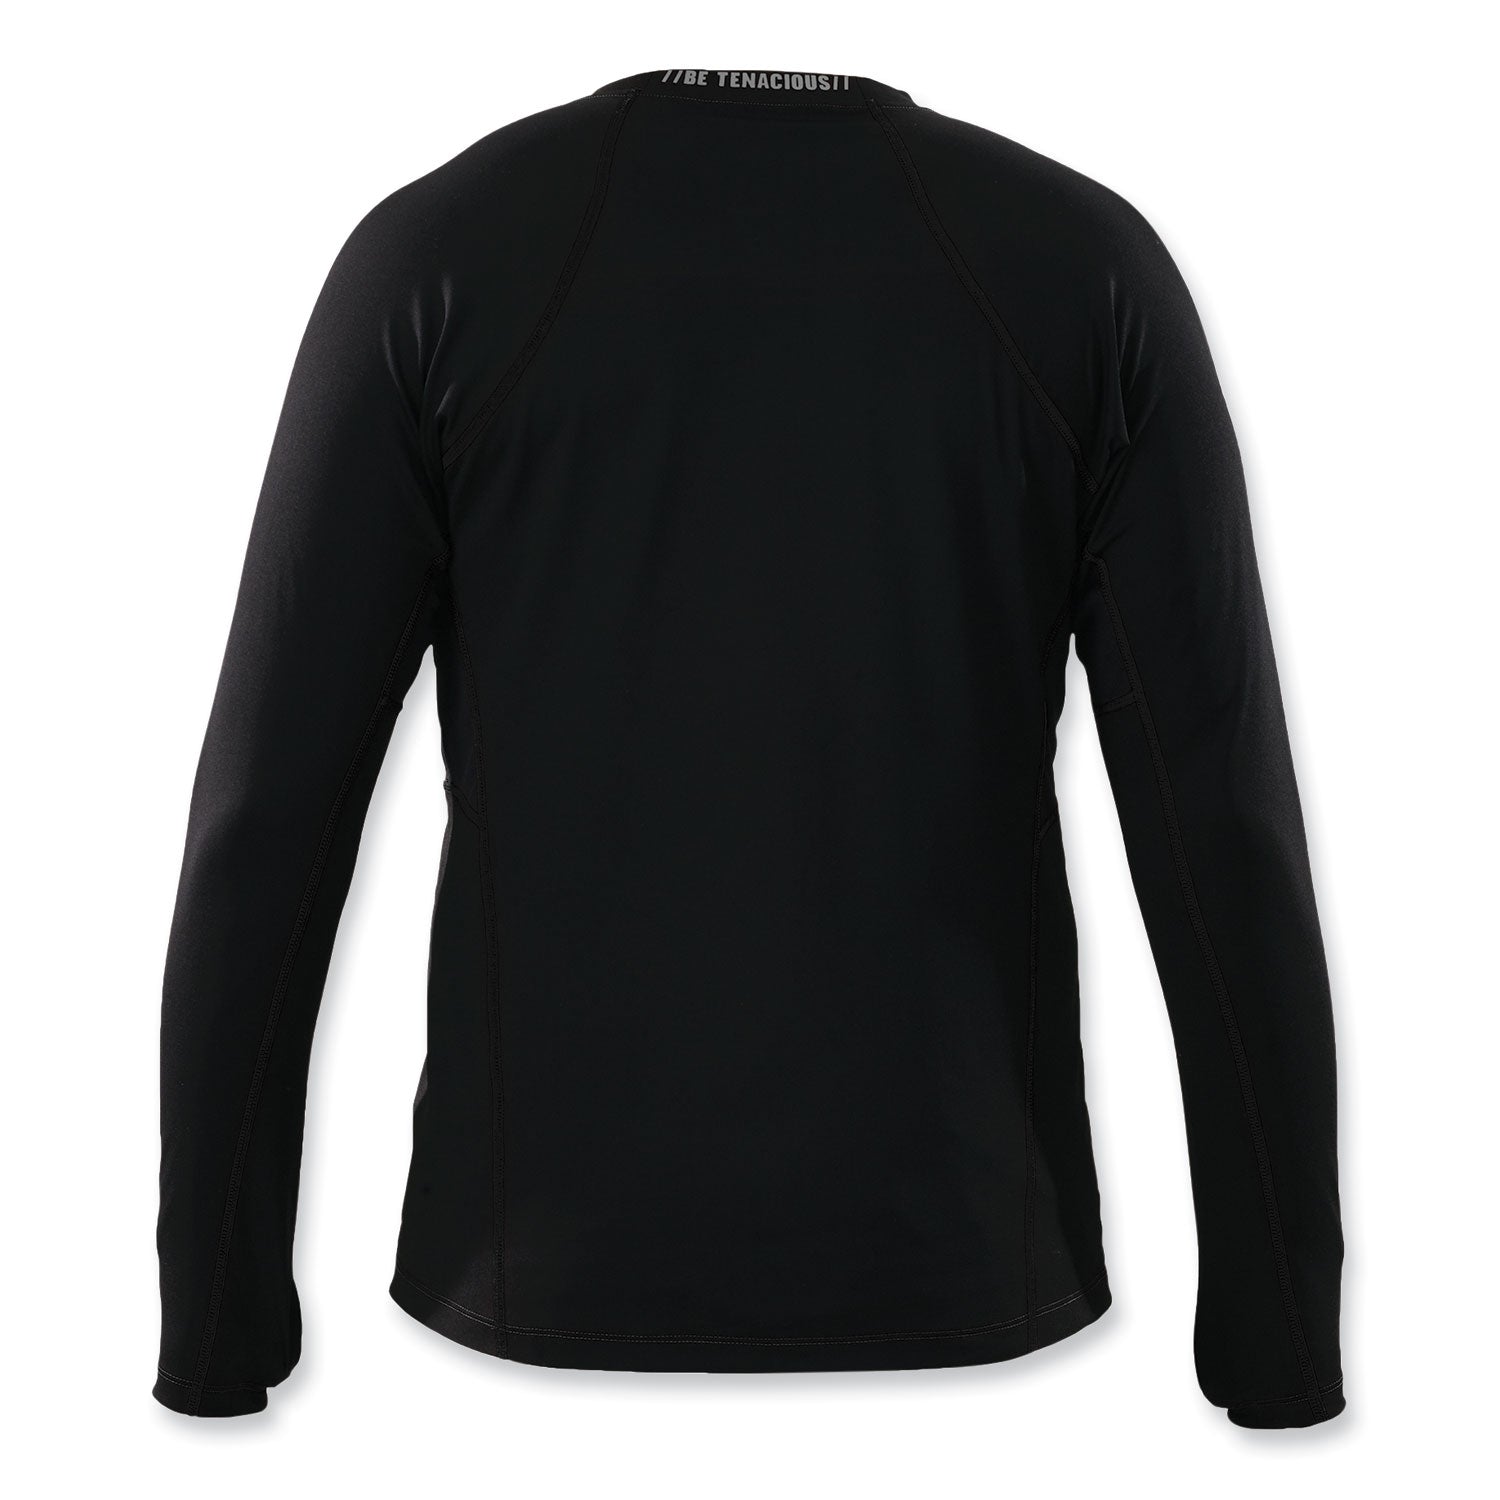 n-ferno-6435-midweight-long-sleeve-base-layer-shirt-3x-large-black-ships-in-1-3-business-days_ego40207 - 2